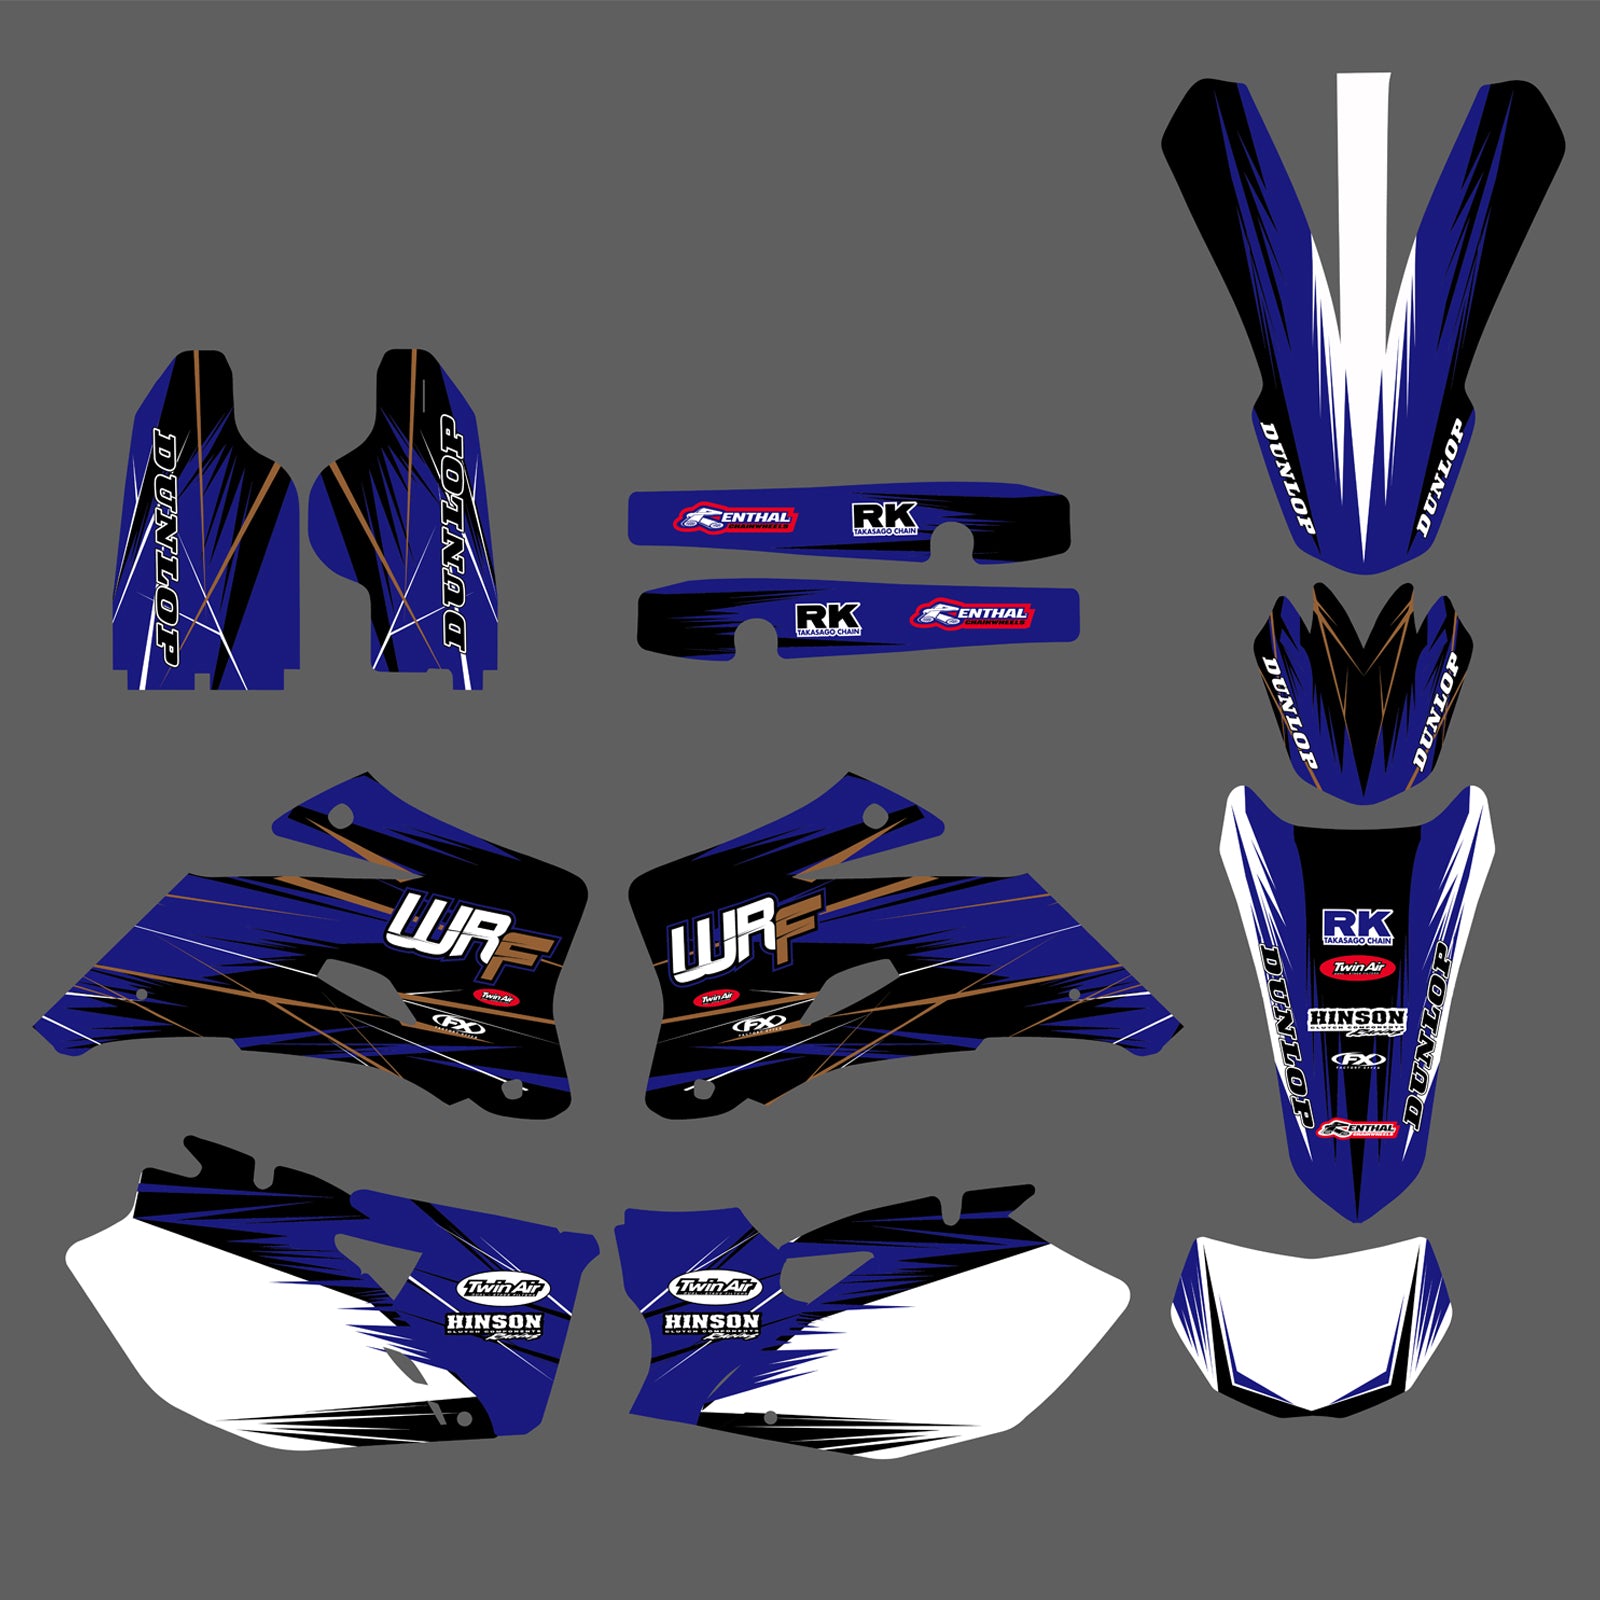 Team Graphic Background Decal Sticker Kit For YAMAHA WR250F 2007-2013 WR450F 2007-2011